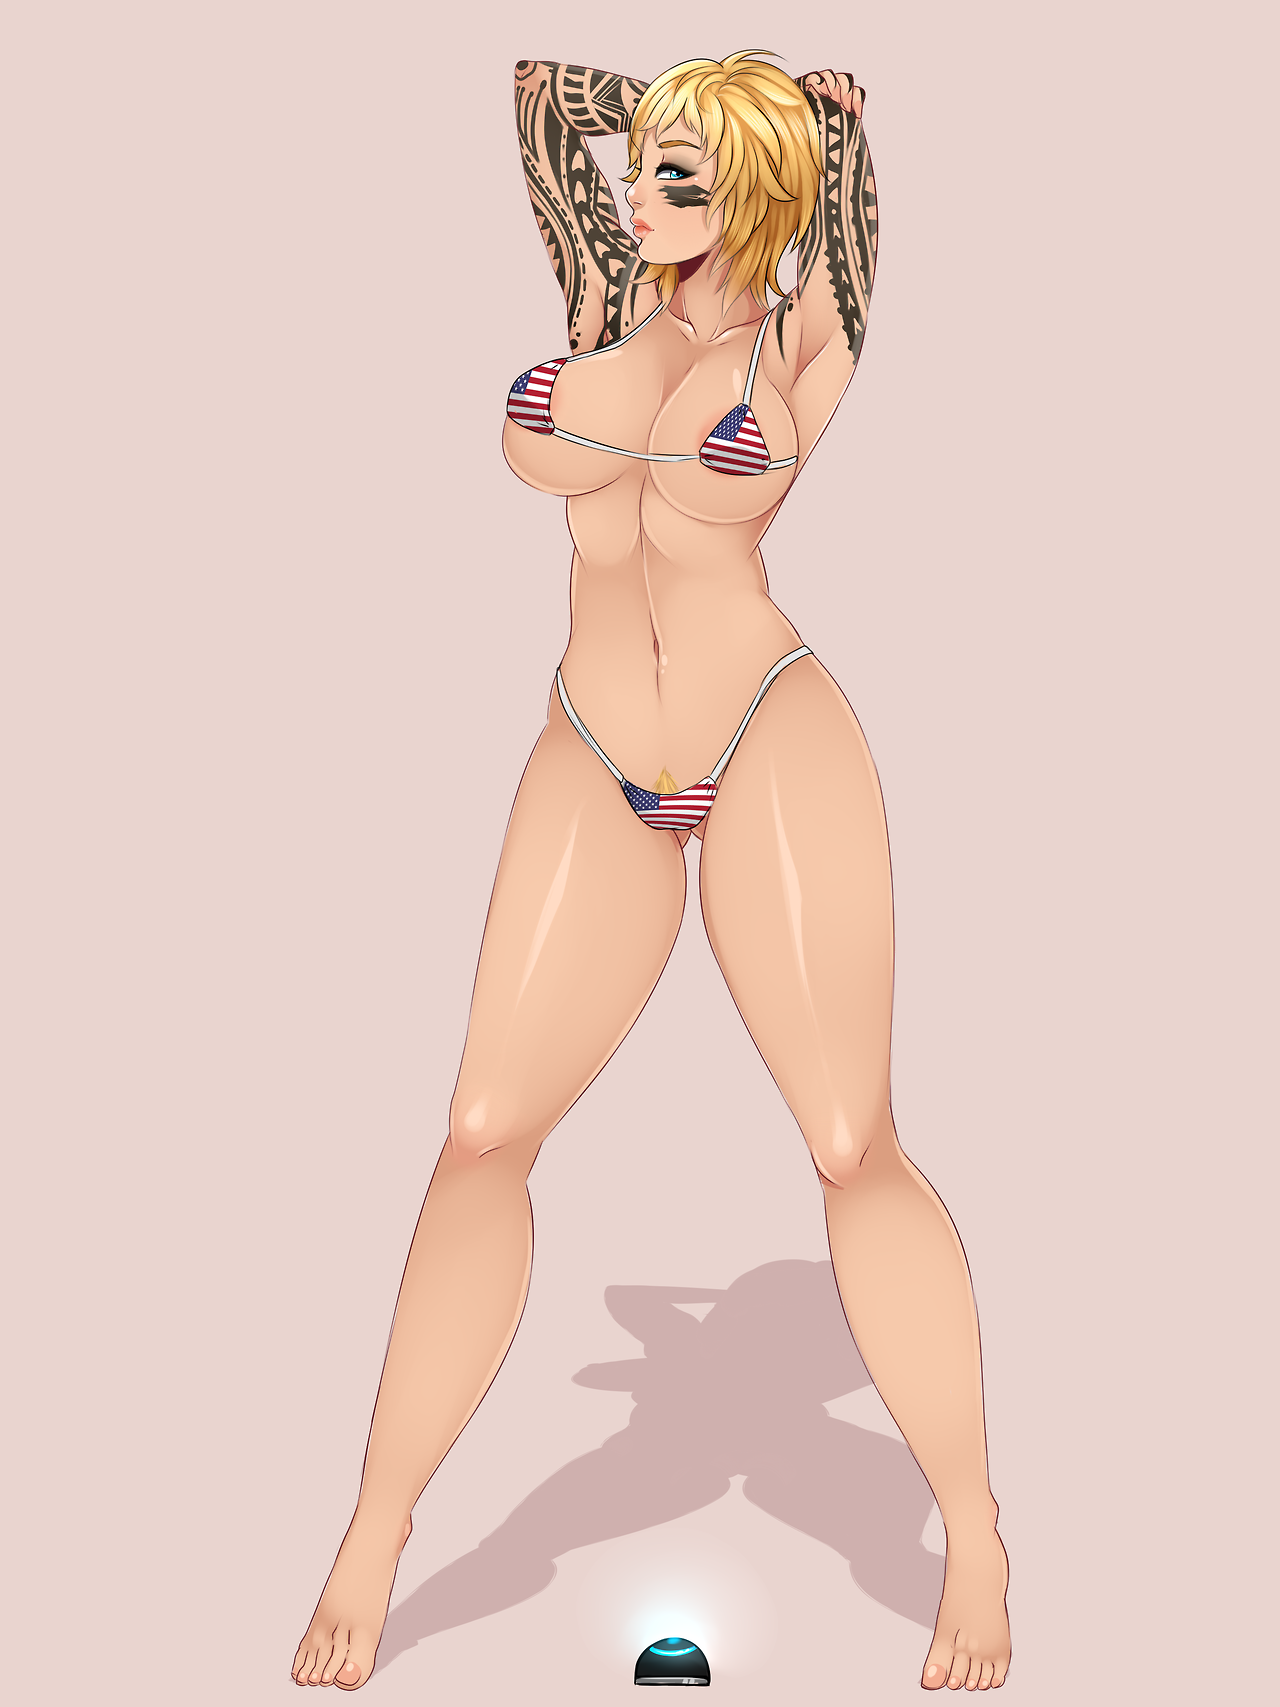 Promised. Valkyrie reached  400 notes and here’s her U.S.A microbikini version